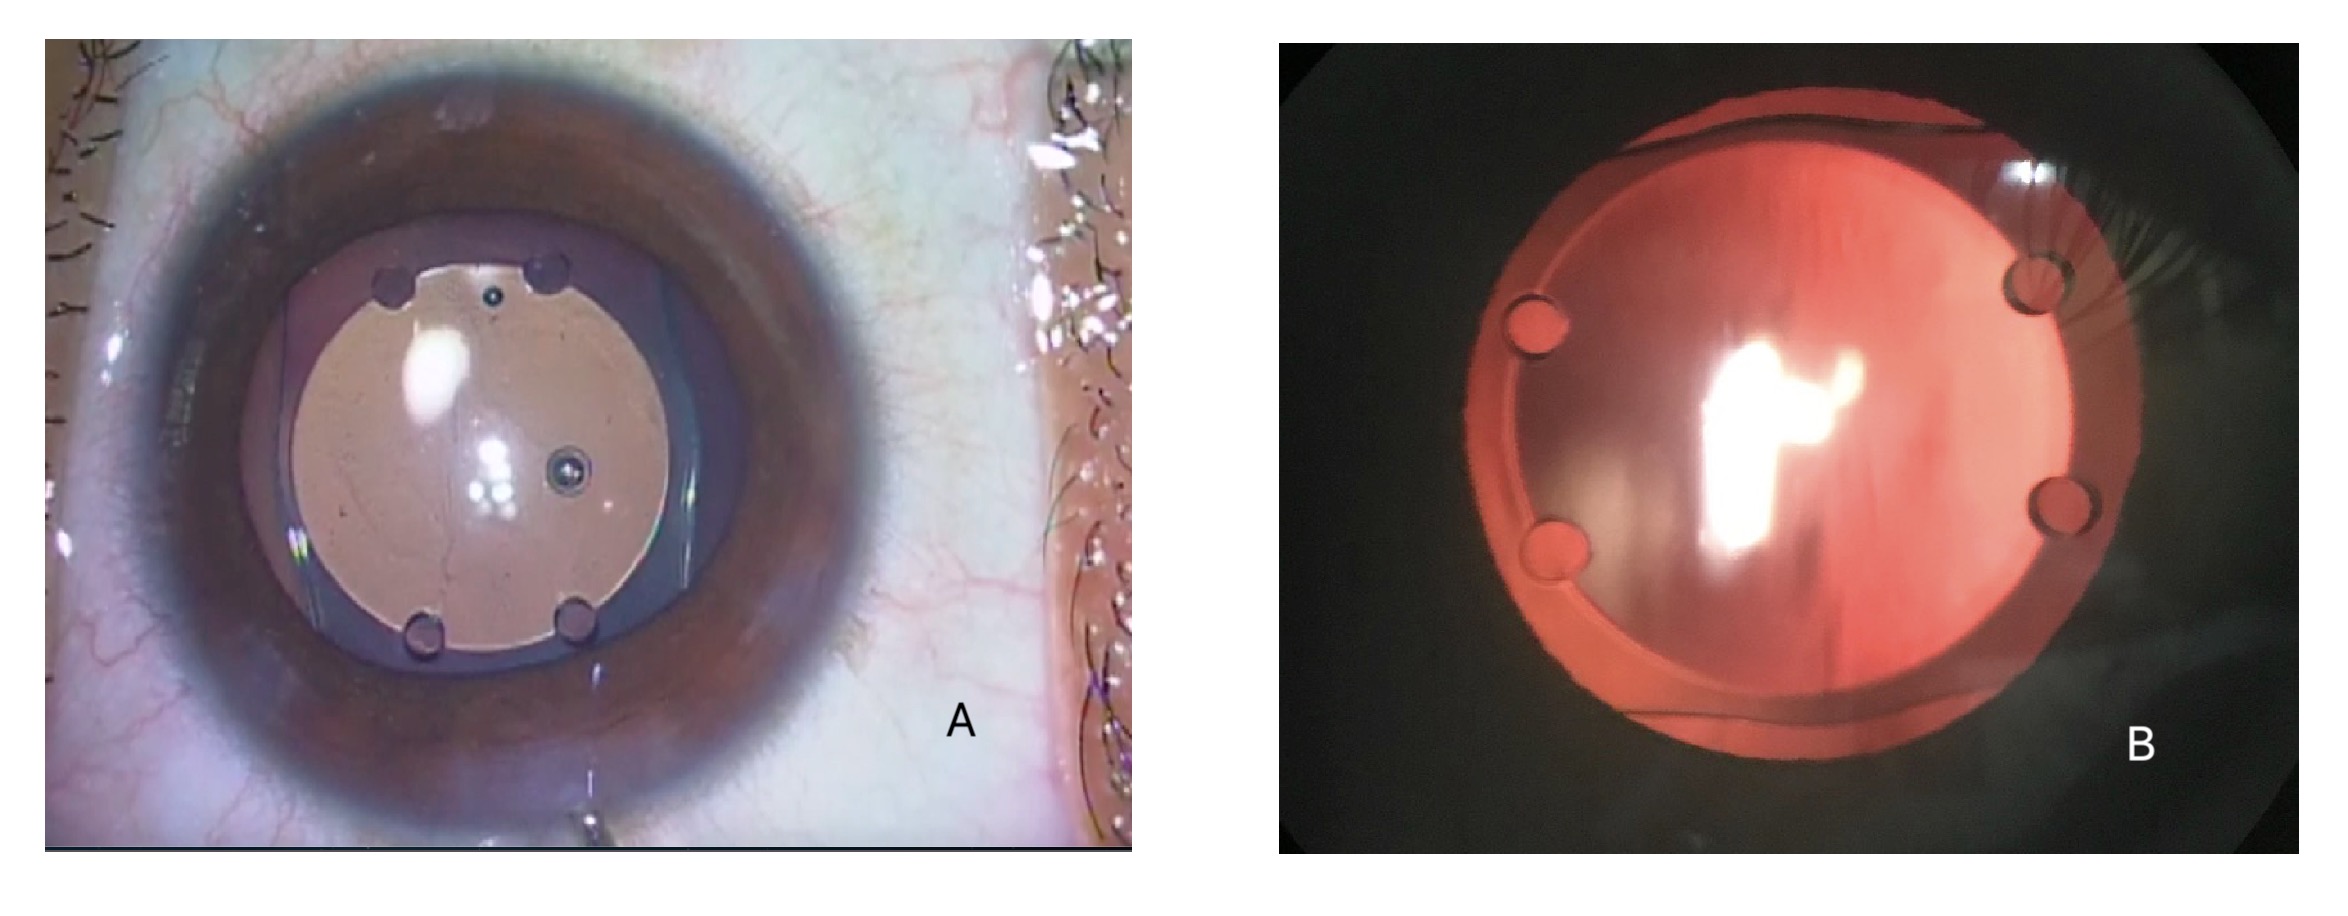 Phakic Intraocular Lens: A) Showing the intraoperative view 
                                            B) Showing the retro-illumination view with slit-lamp